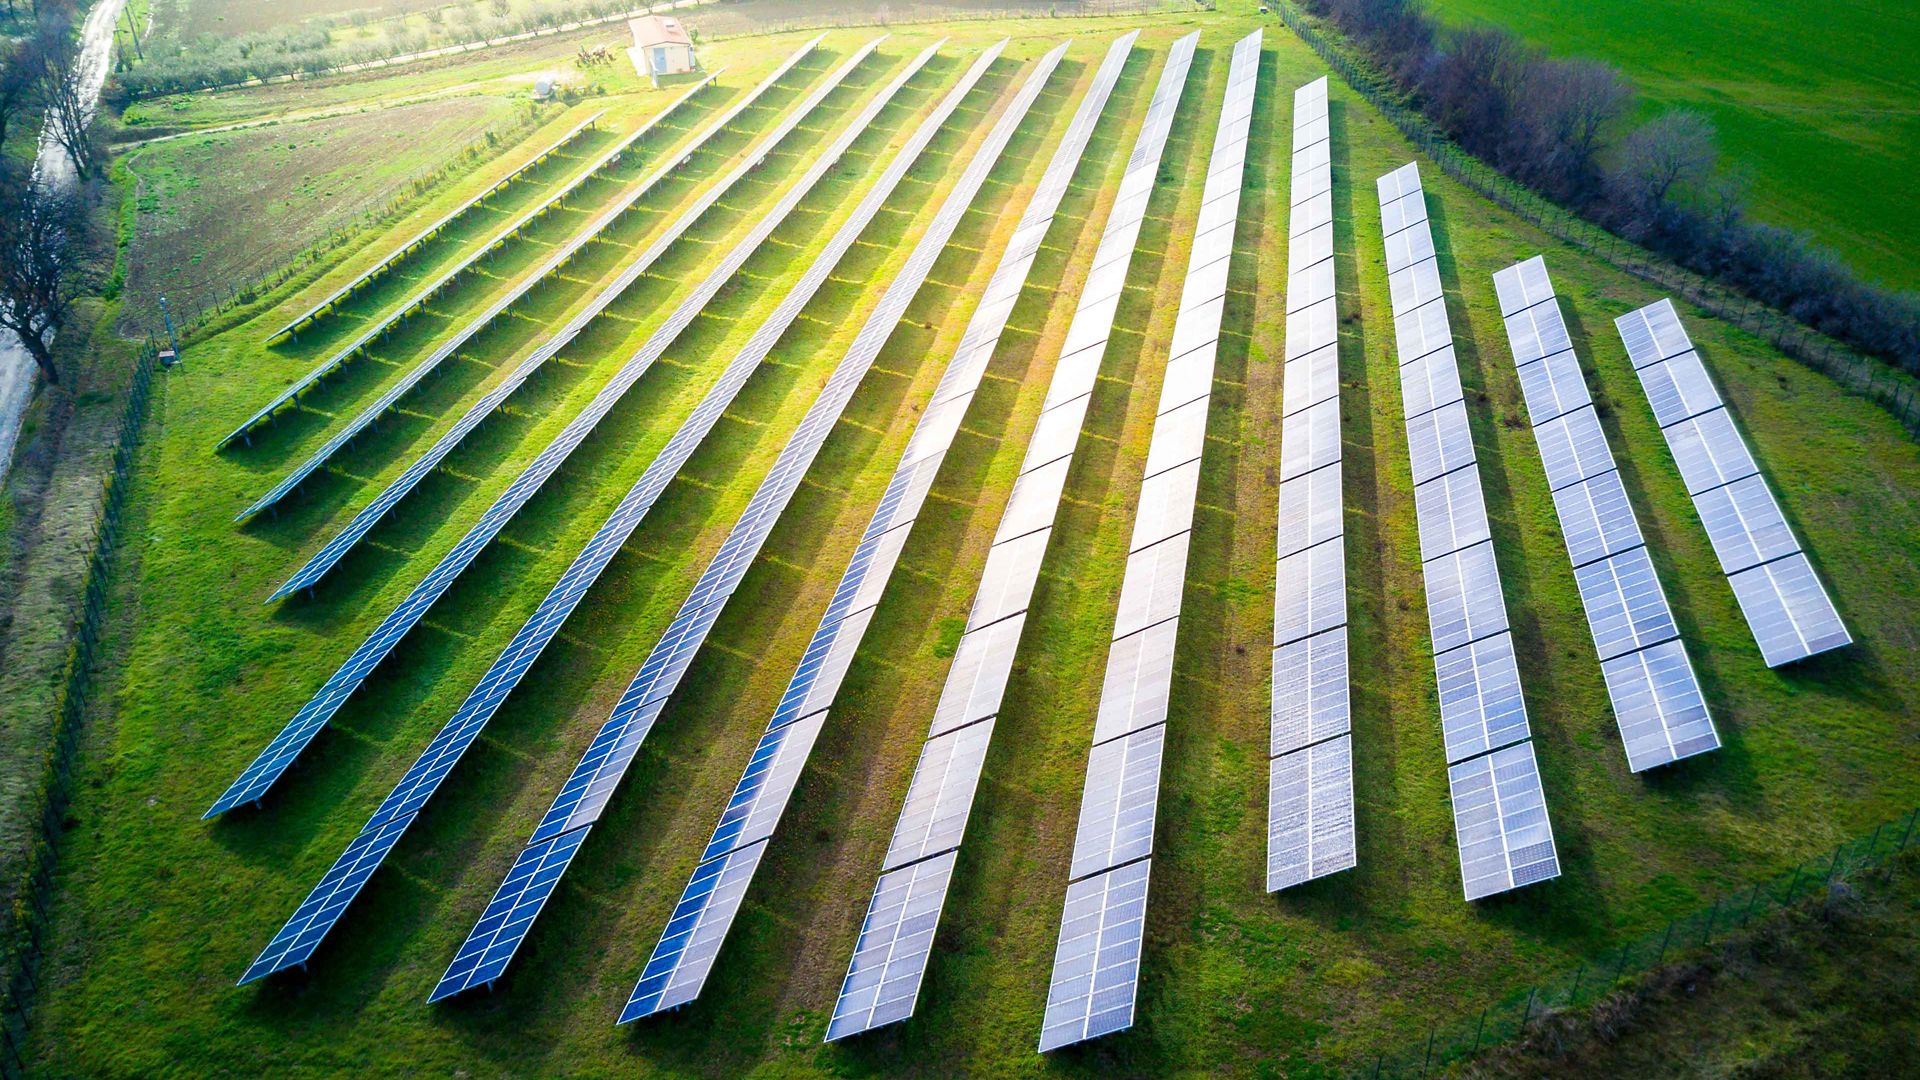 aerial view of solar panels on a sunny day. power farm producing clean energy